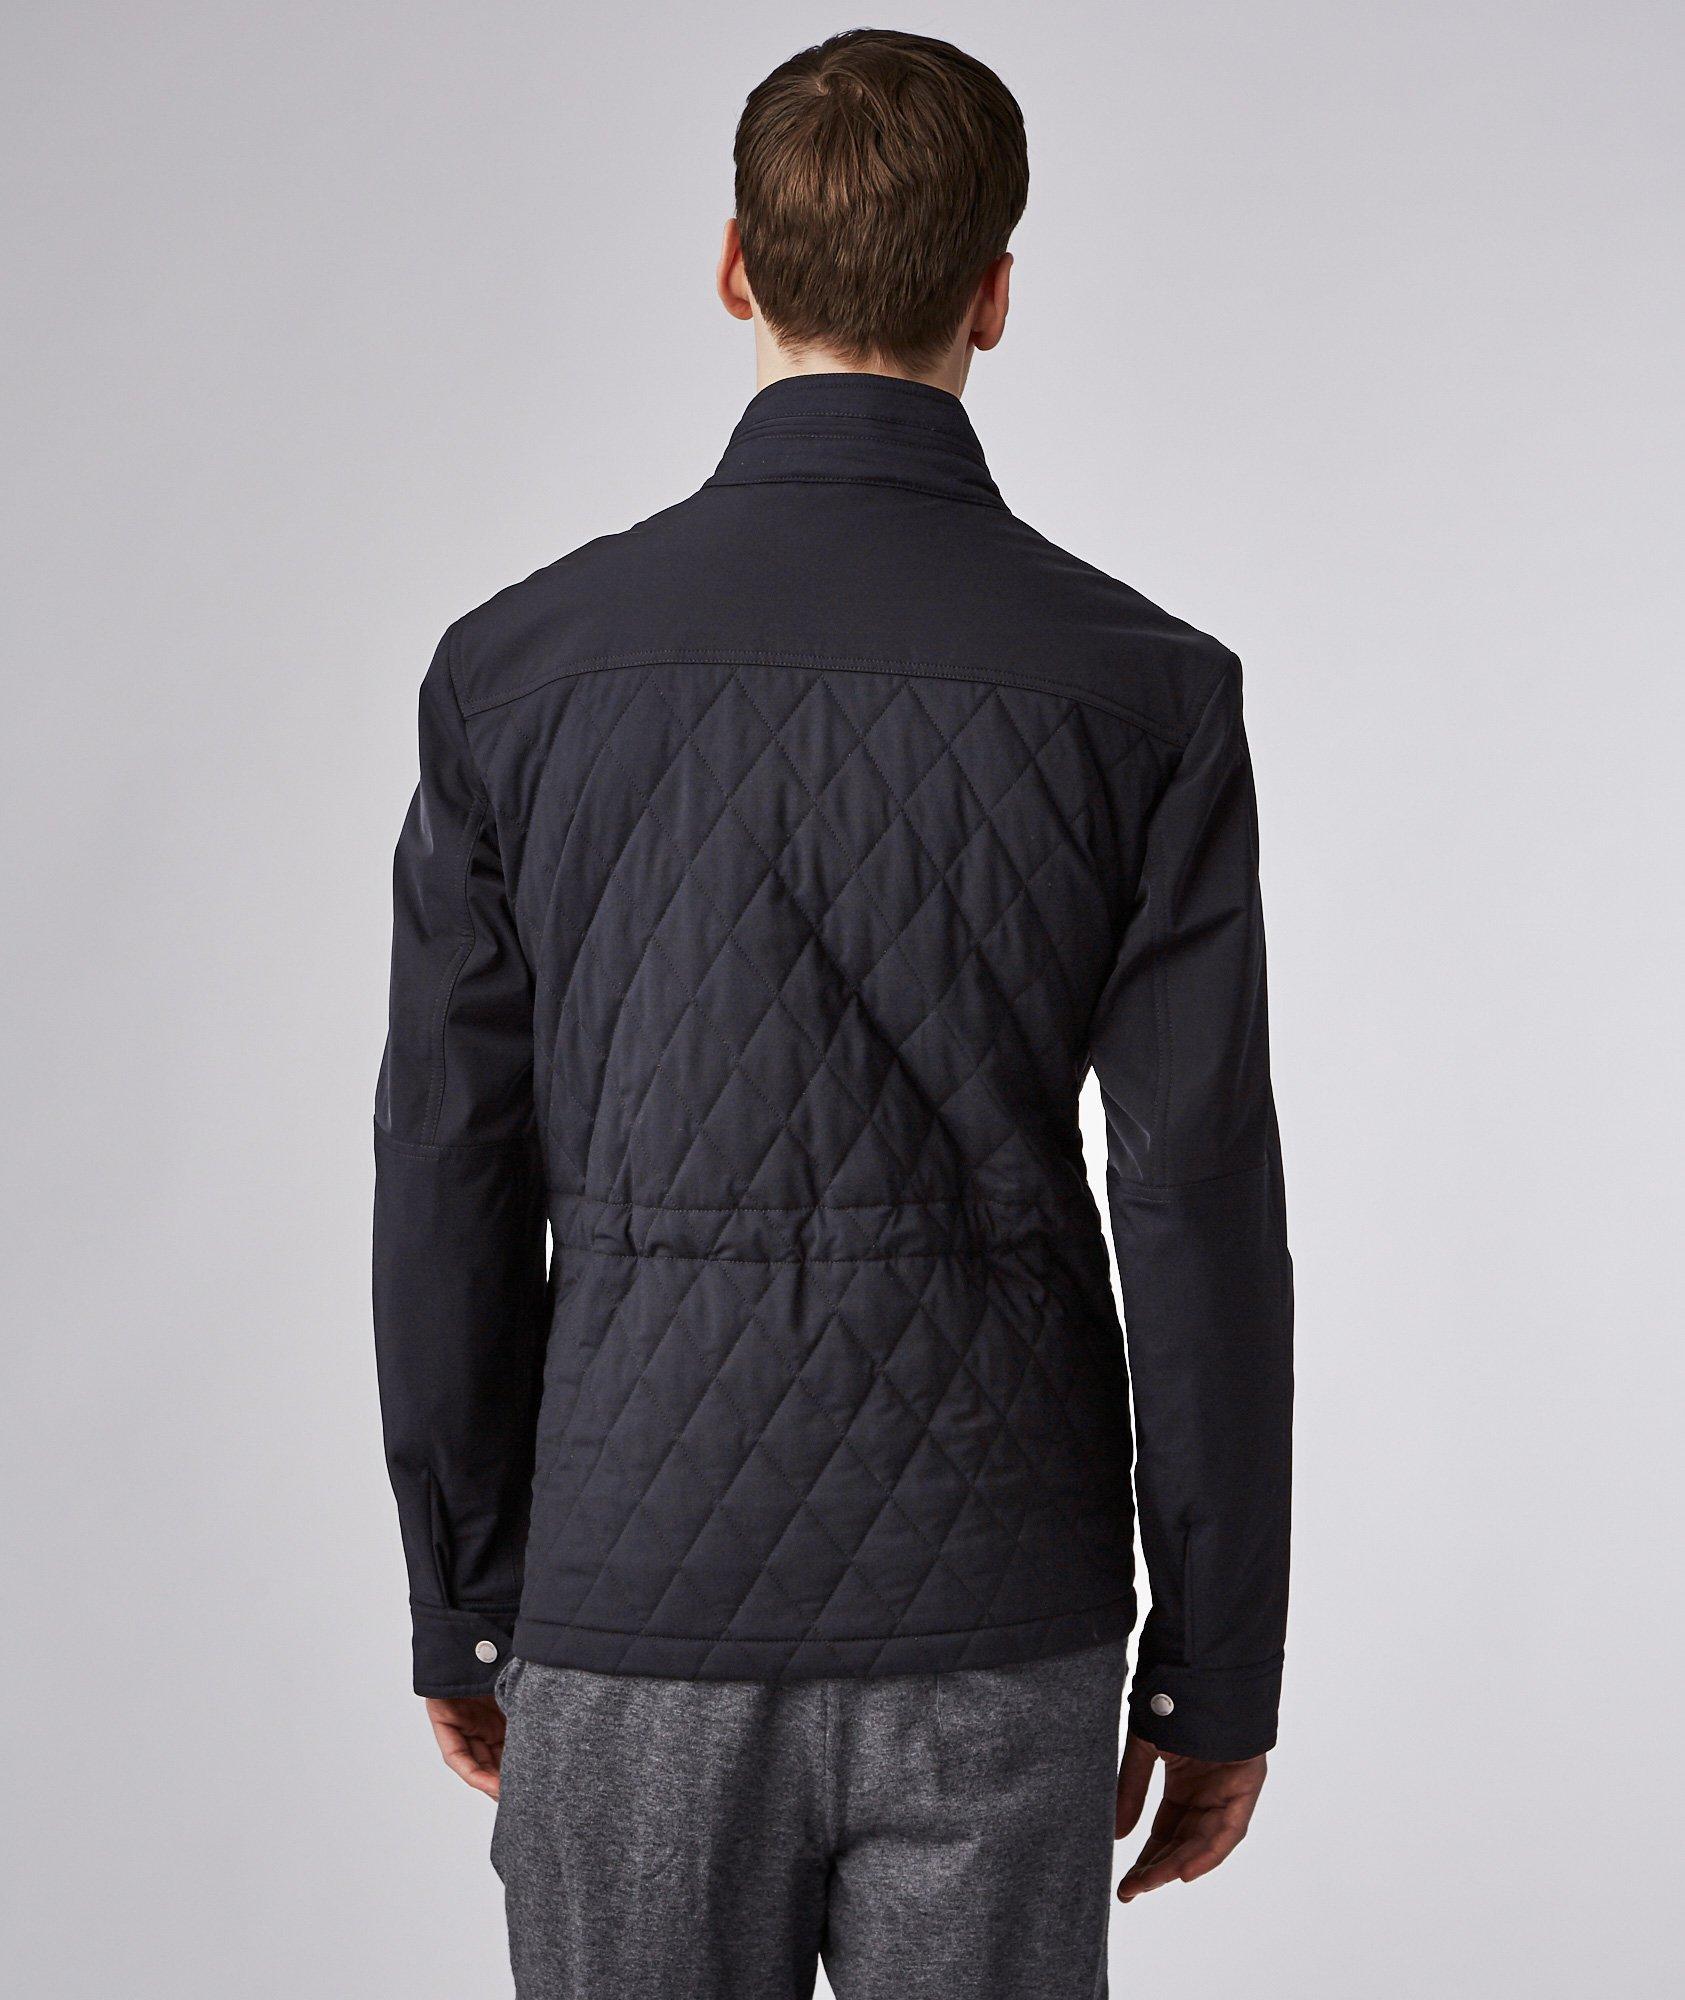 Quilted Wool Jacket image 1